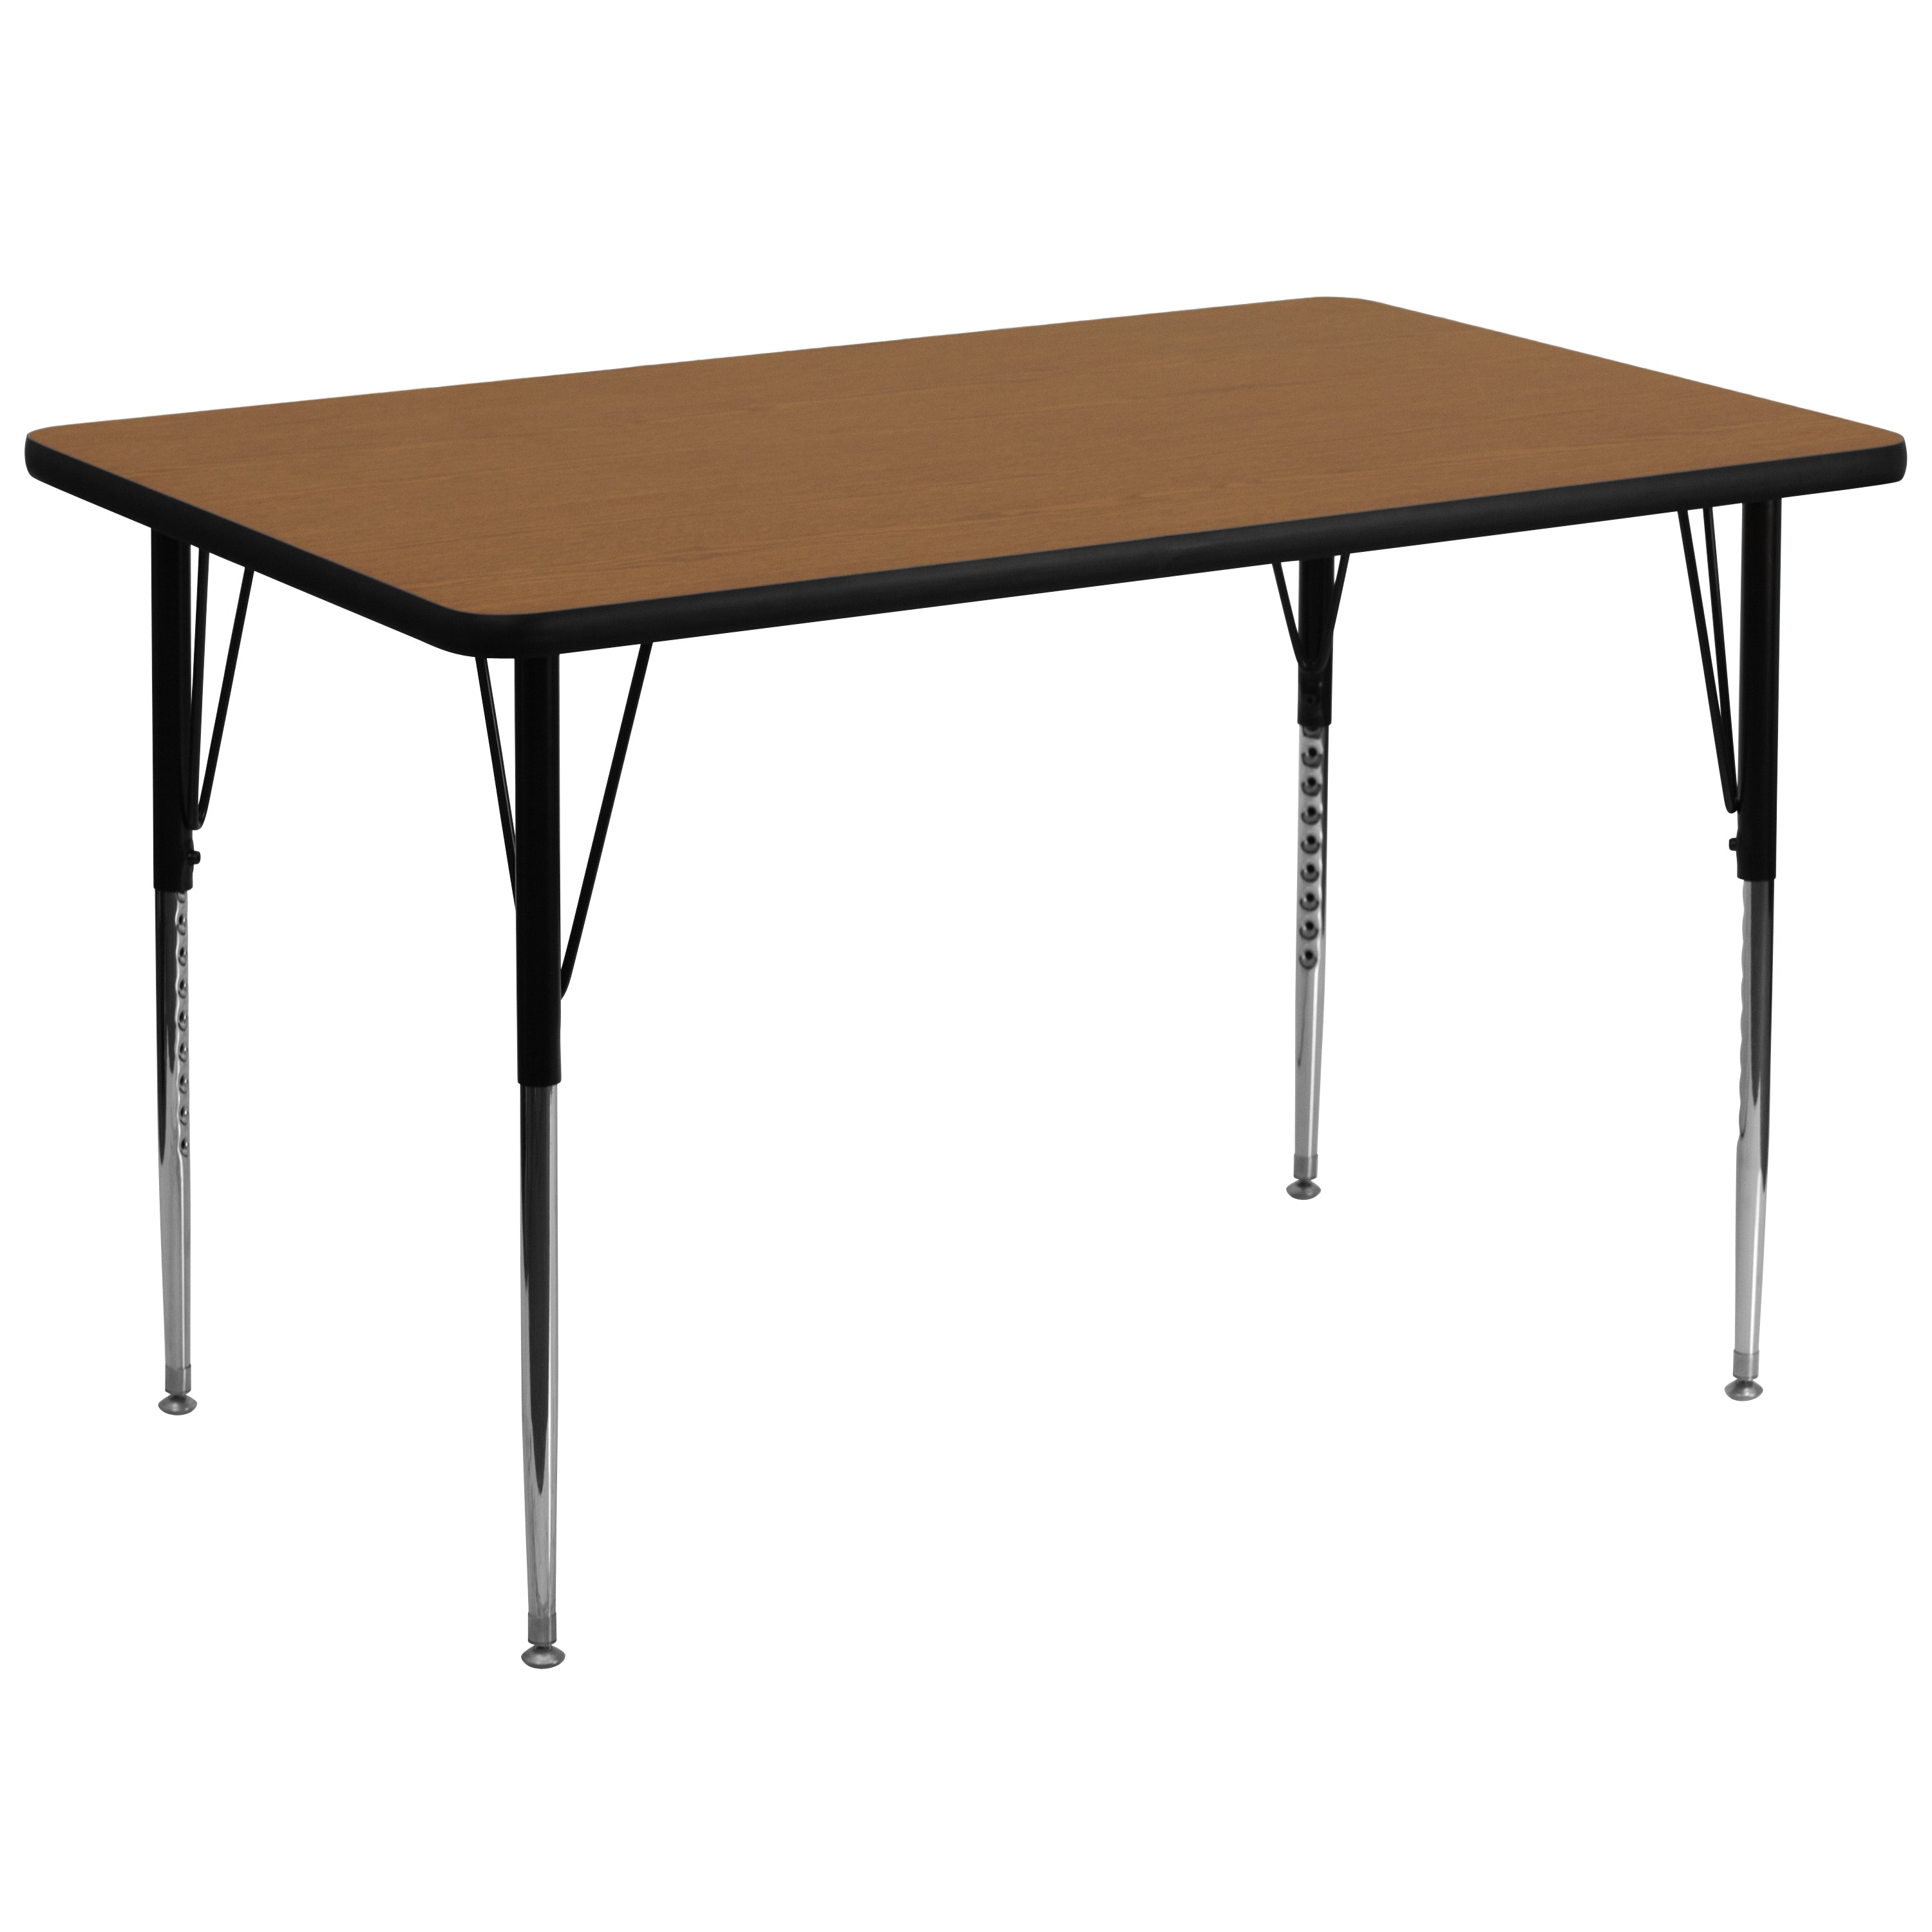 36''W x 72''L Rectangular Thermal Laminate Activity Table - Standard Height Adjustable Legs-Rectangular Activity Table-Flash Furniture-Wall2Wall Furnishings